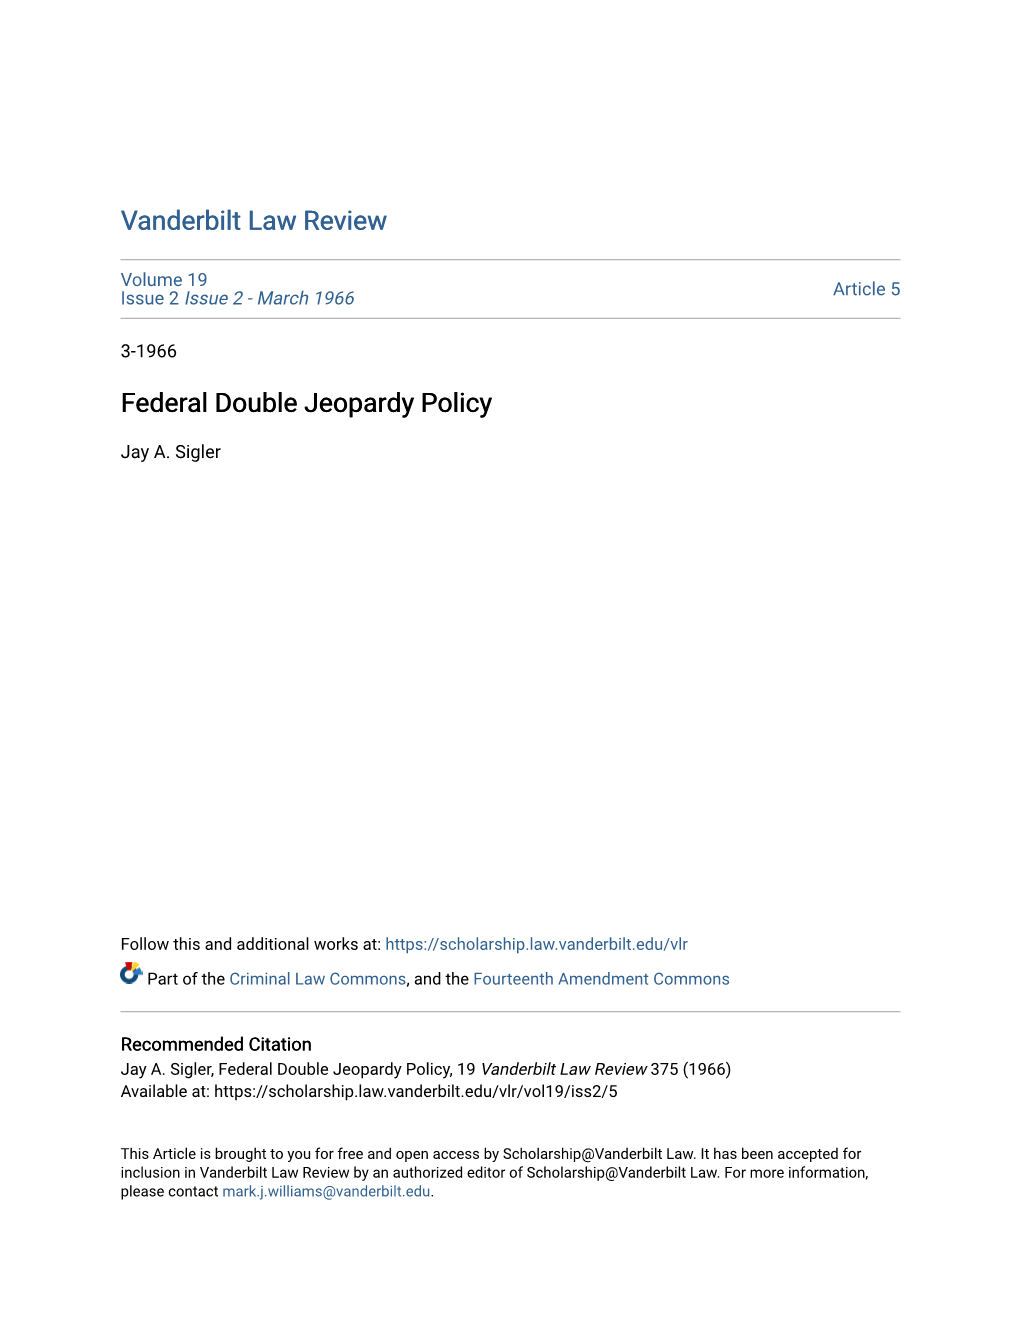 Federal Double Jeopardy Policy